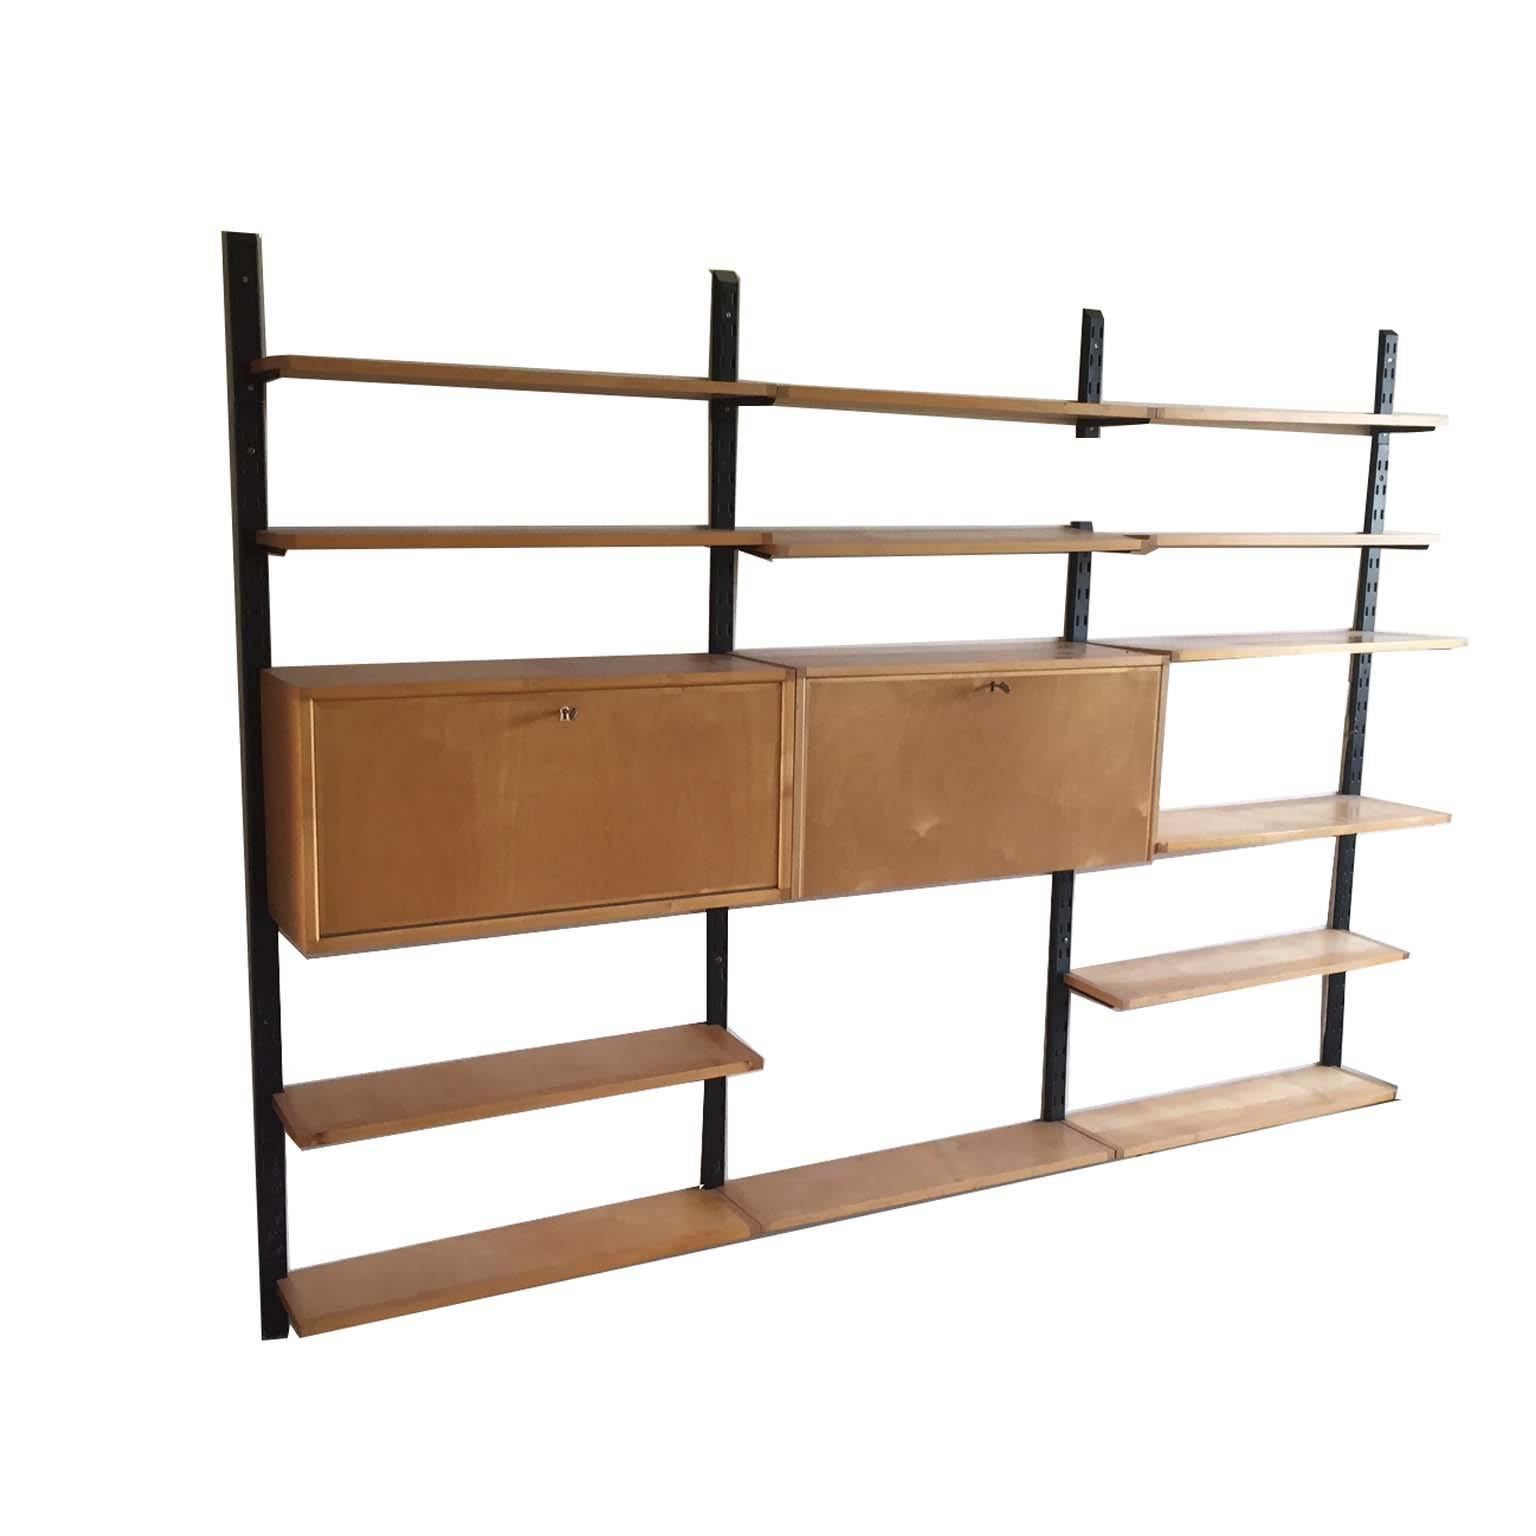 Mid-Century Modern Cees Braakman for Pastoe “Birch Series” Style Wall System, Dutch, 1950s For Sale